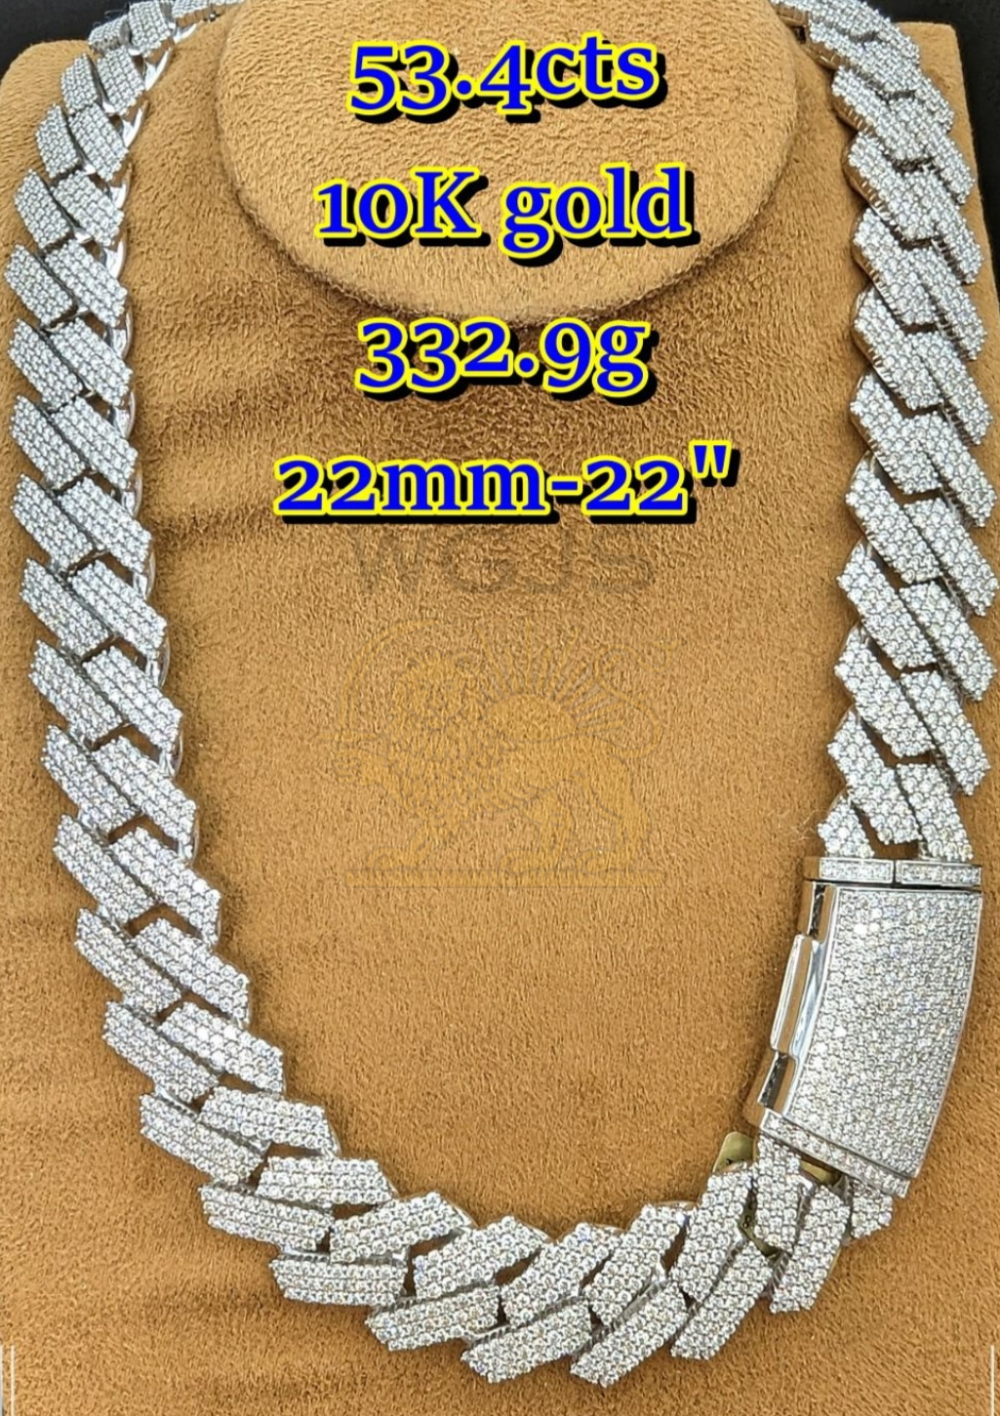 10K White Gold Miami Cuban chain with 53.4 CTS  diamonds, 332.9 GRMS, 22